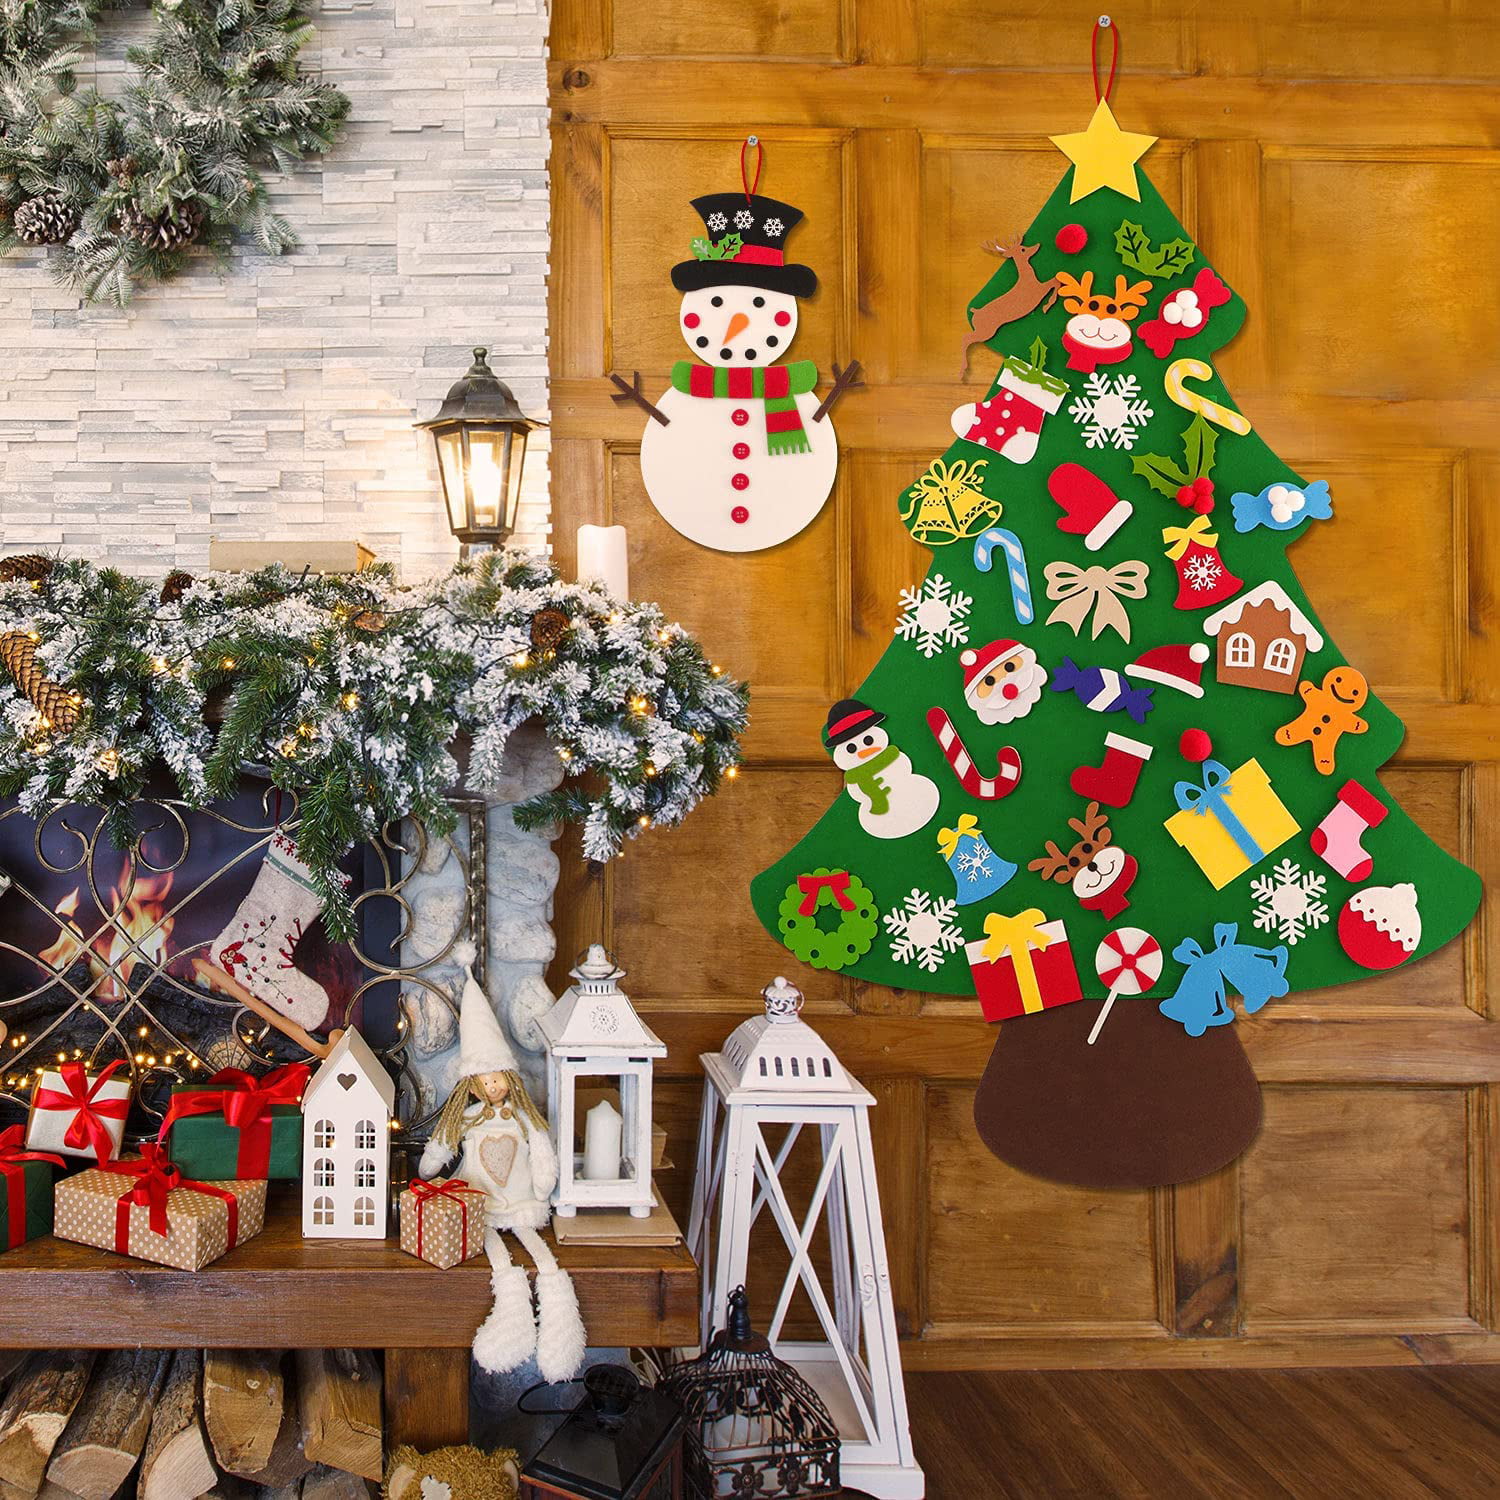 Ywlake 3.3ft DIY Felt Christmas Tree Set Plus Christmas Snowman Party Decor Supplies Indoor Wall Hanging Decorations Xmas Gift for Kids Childrens Toddler 40pcs Detachable Ornaments